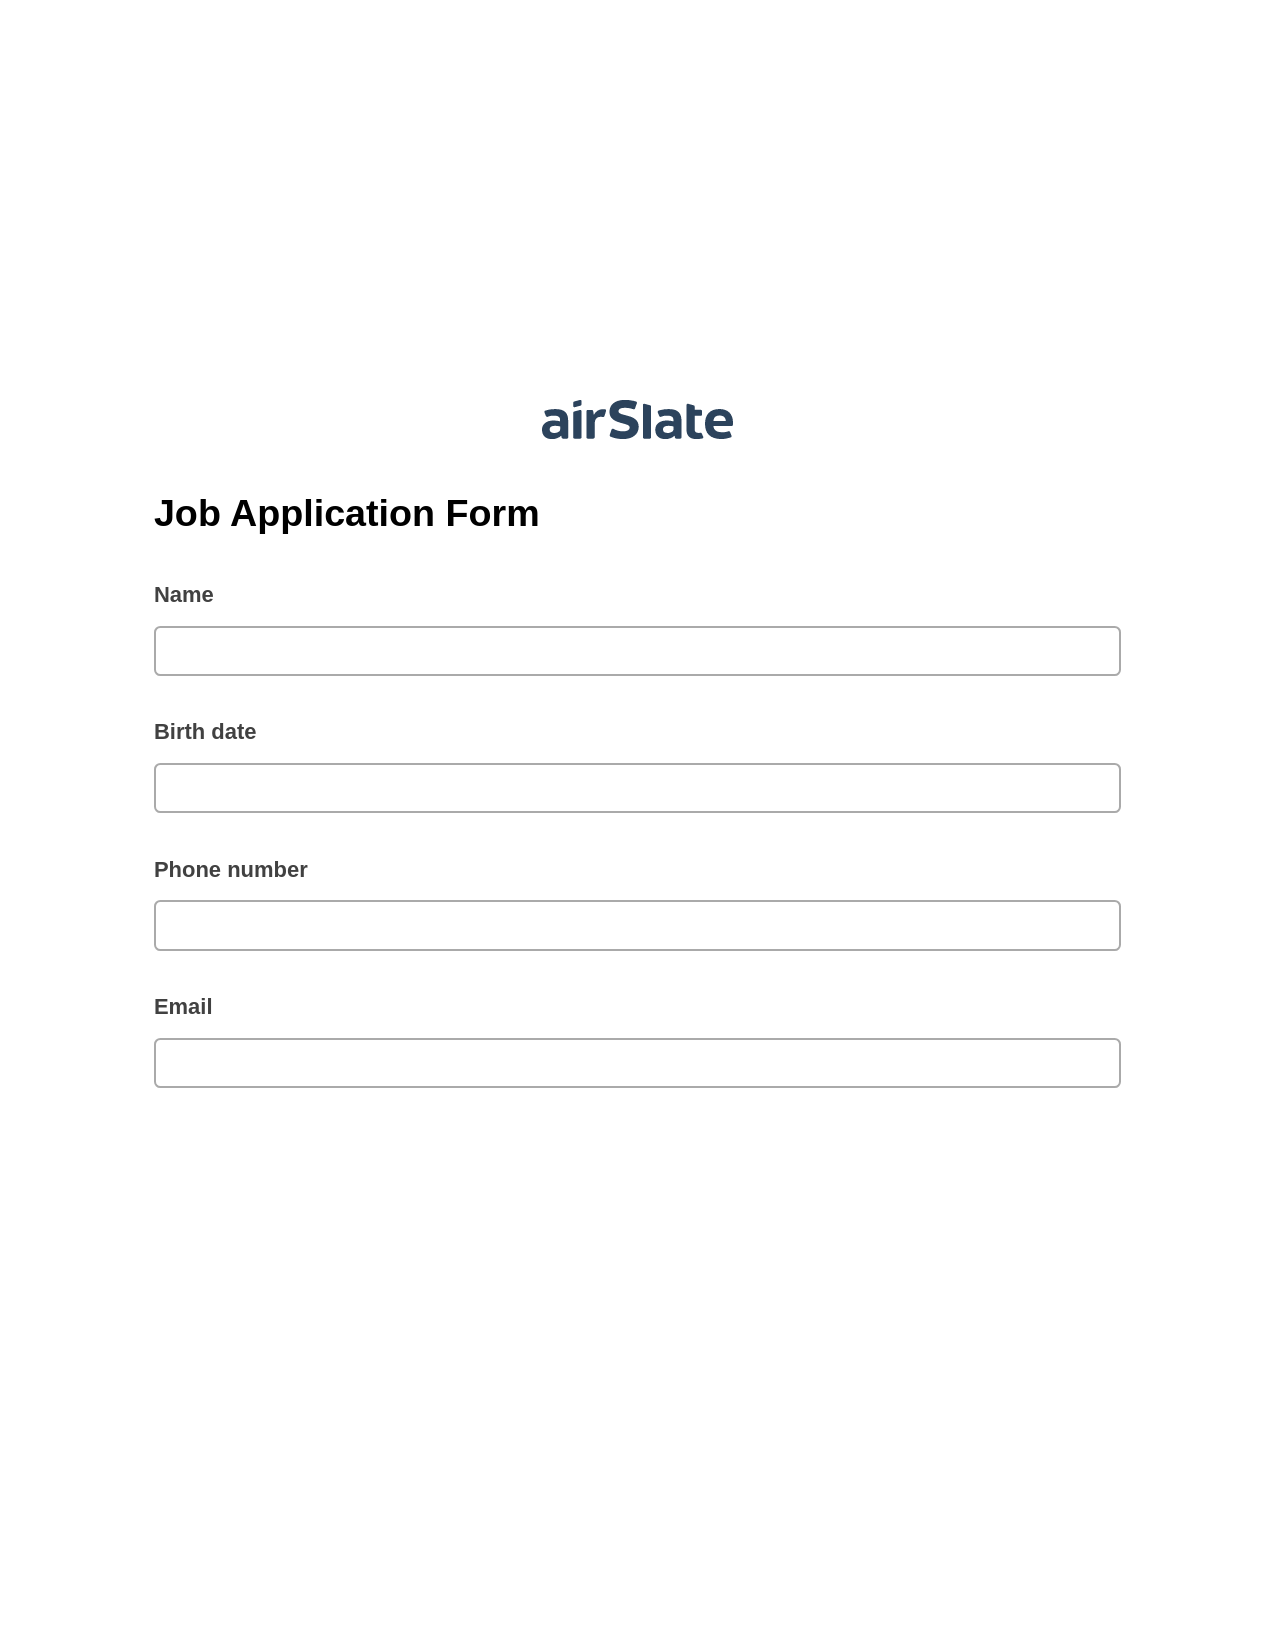 Multirole Job Application Form Pre-fill from Salesforce Records with SOQL Bot, Invoke Salesforce Process Bot, Export to Formstack Documents Bot